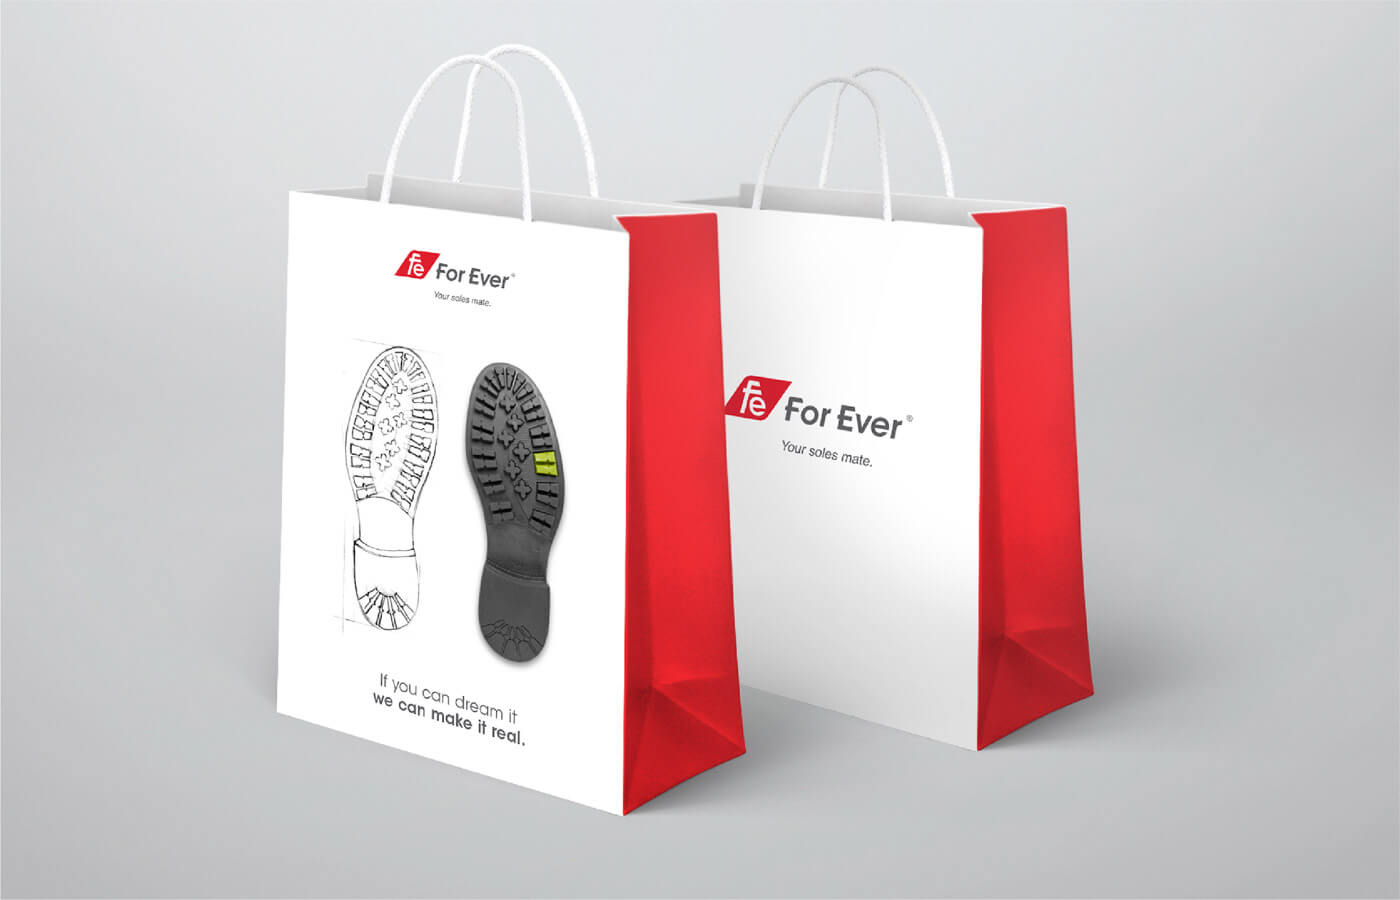 Footwear, soles, branding, industry, manufacture, factory, stationary, design, marketing